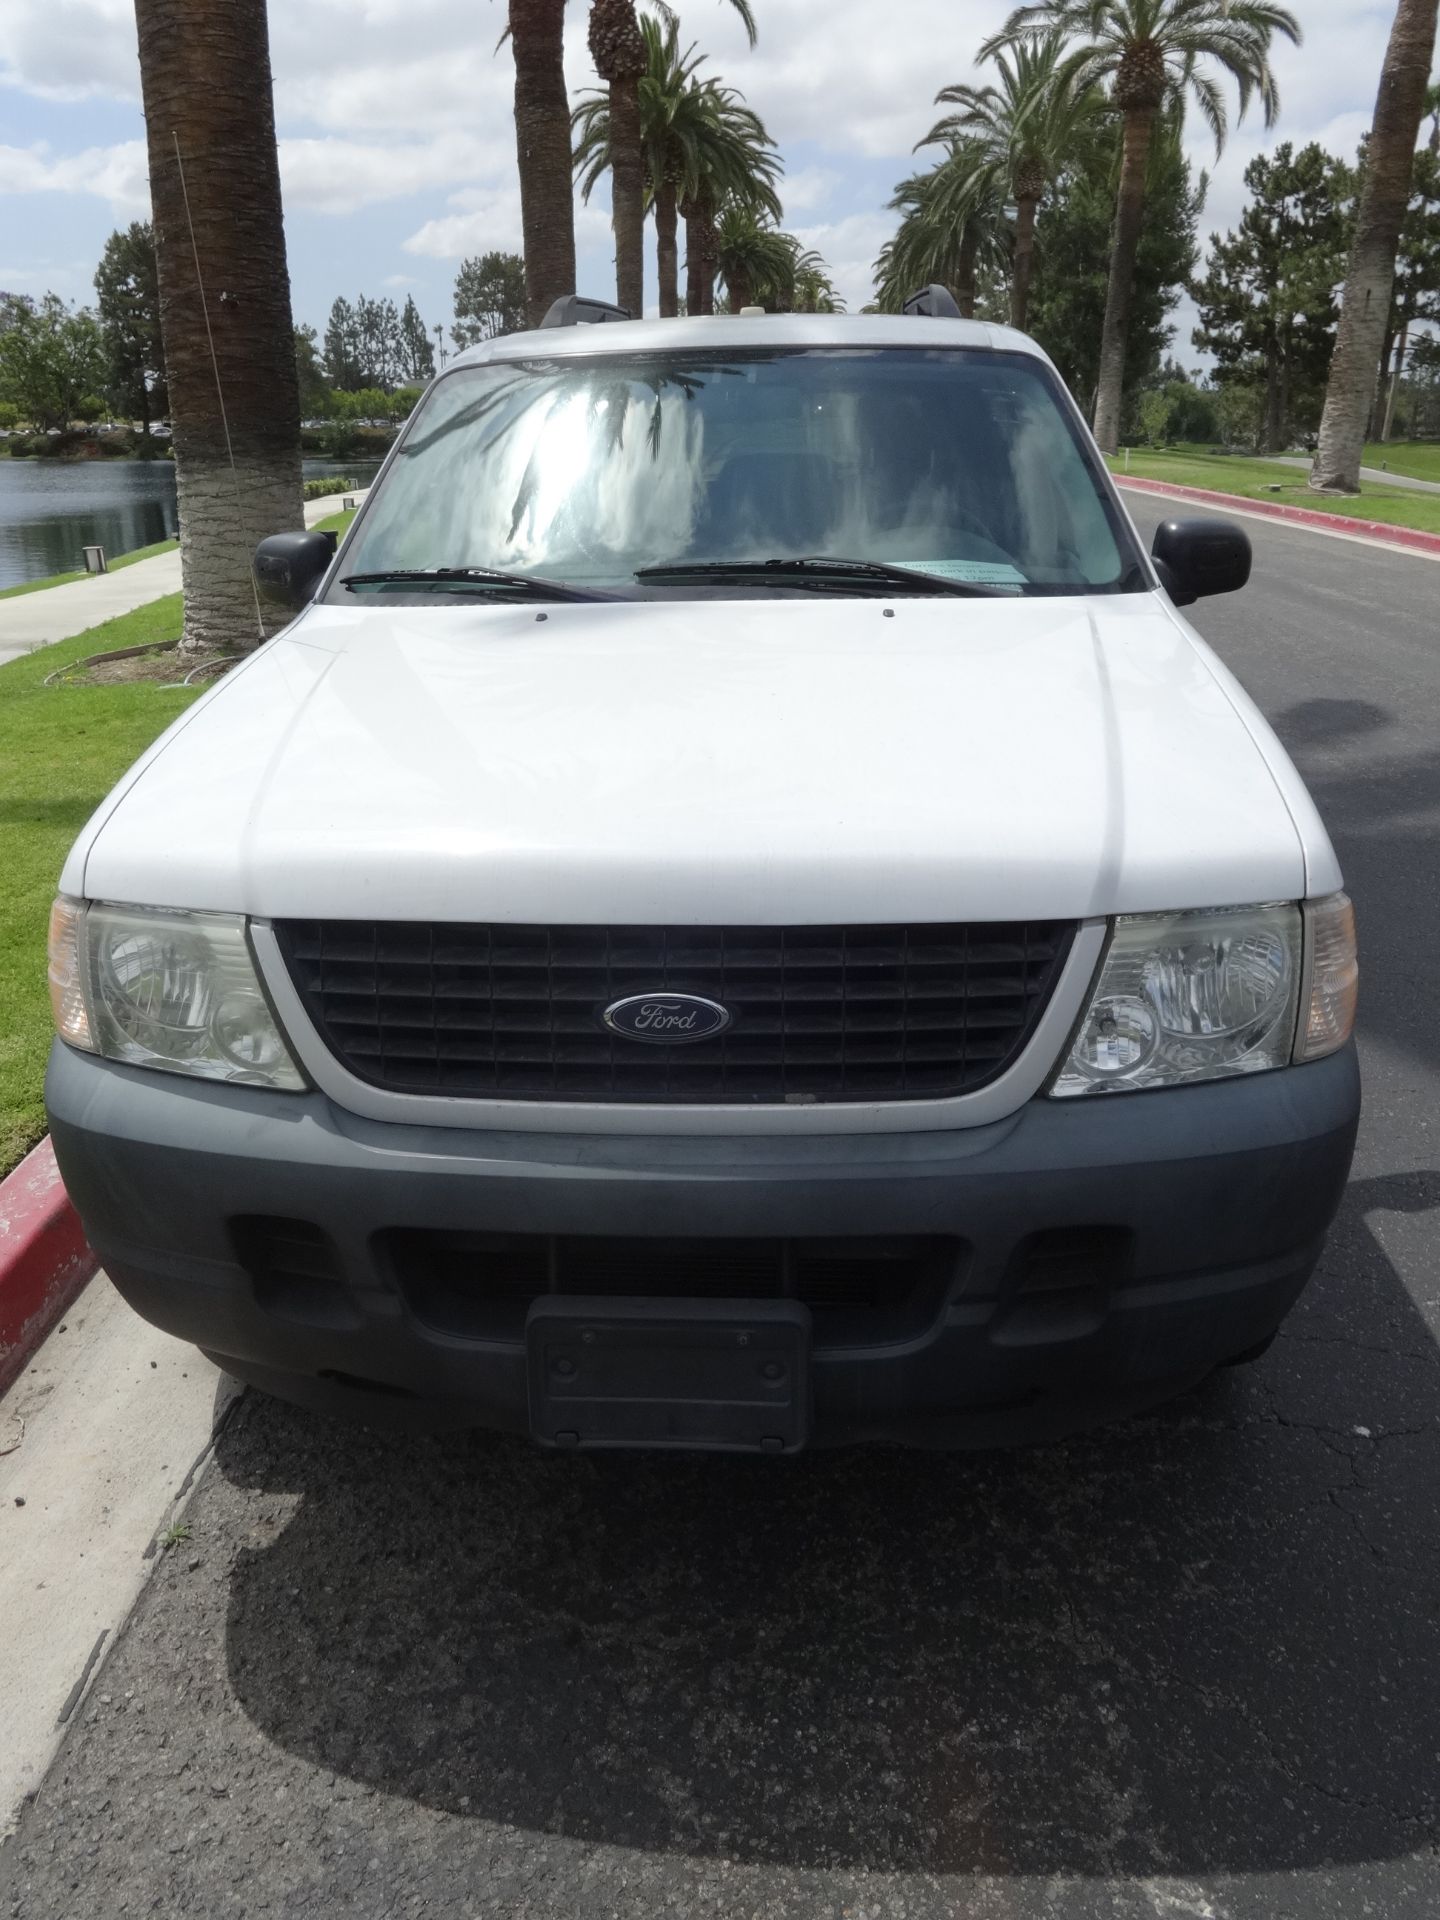 2005 Ford Explorer Advance Trac RSC, VERY GOOD CONDITION (One of Our Best) Equiped with Light Bar - Image 11 of 12